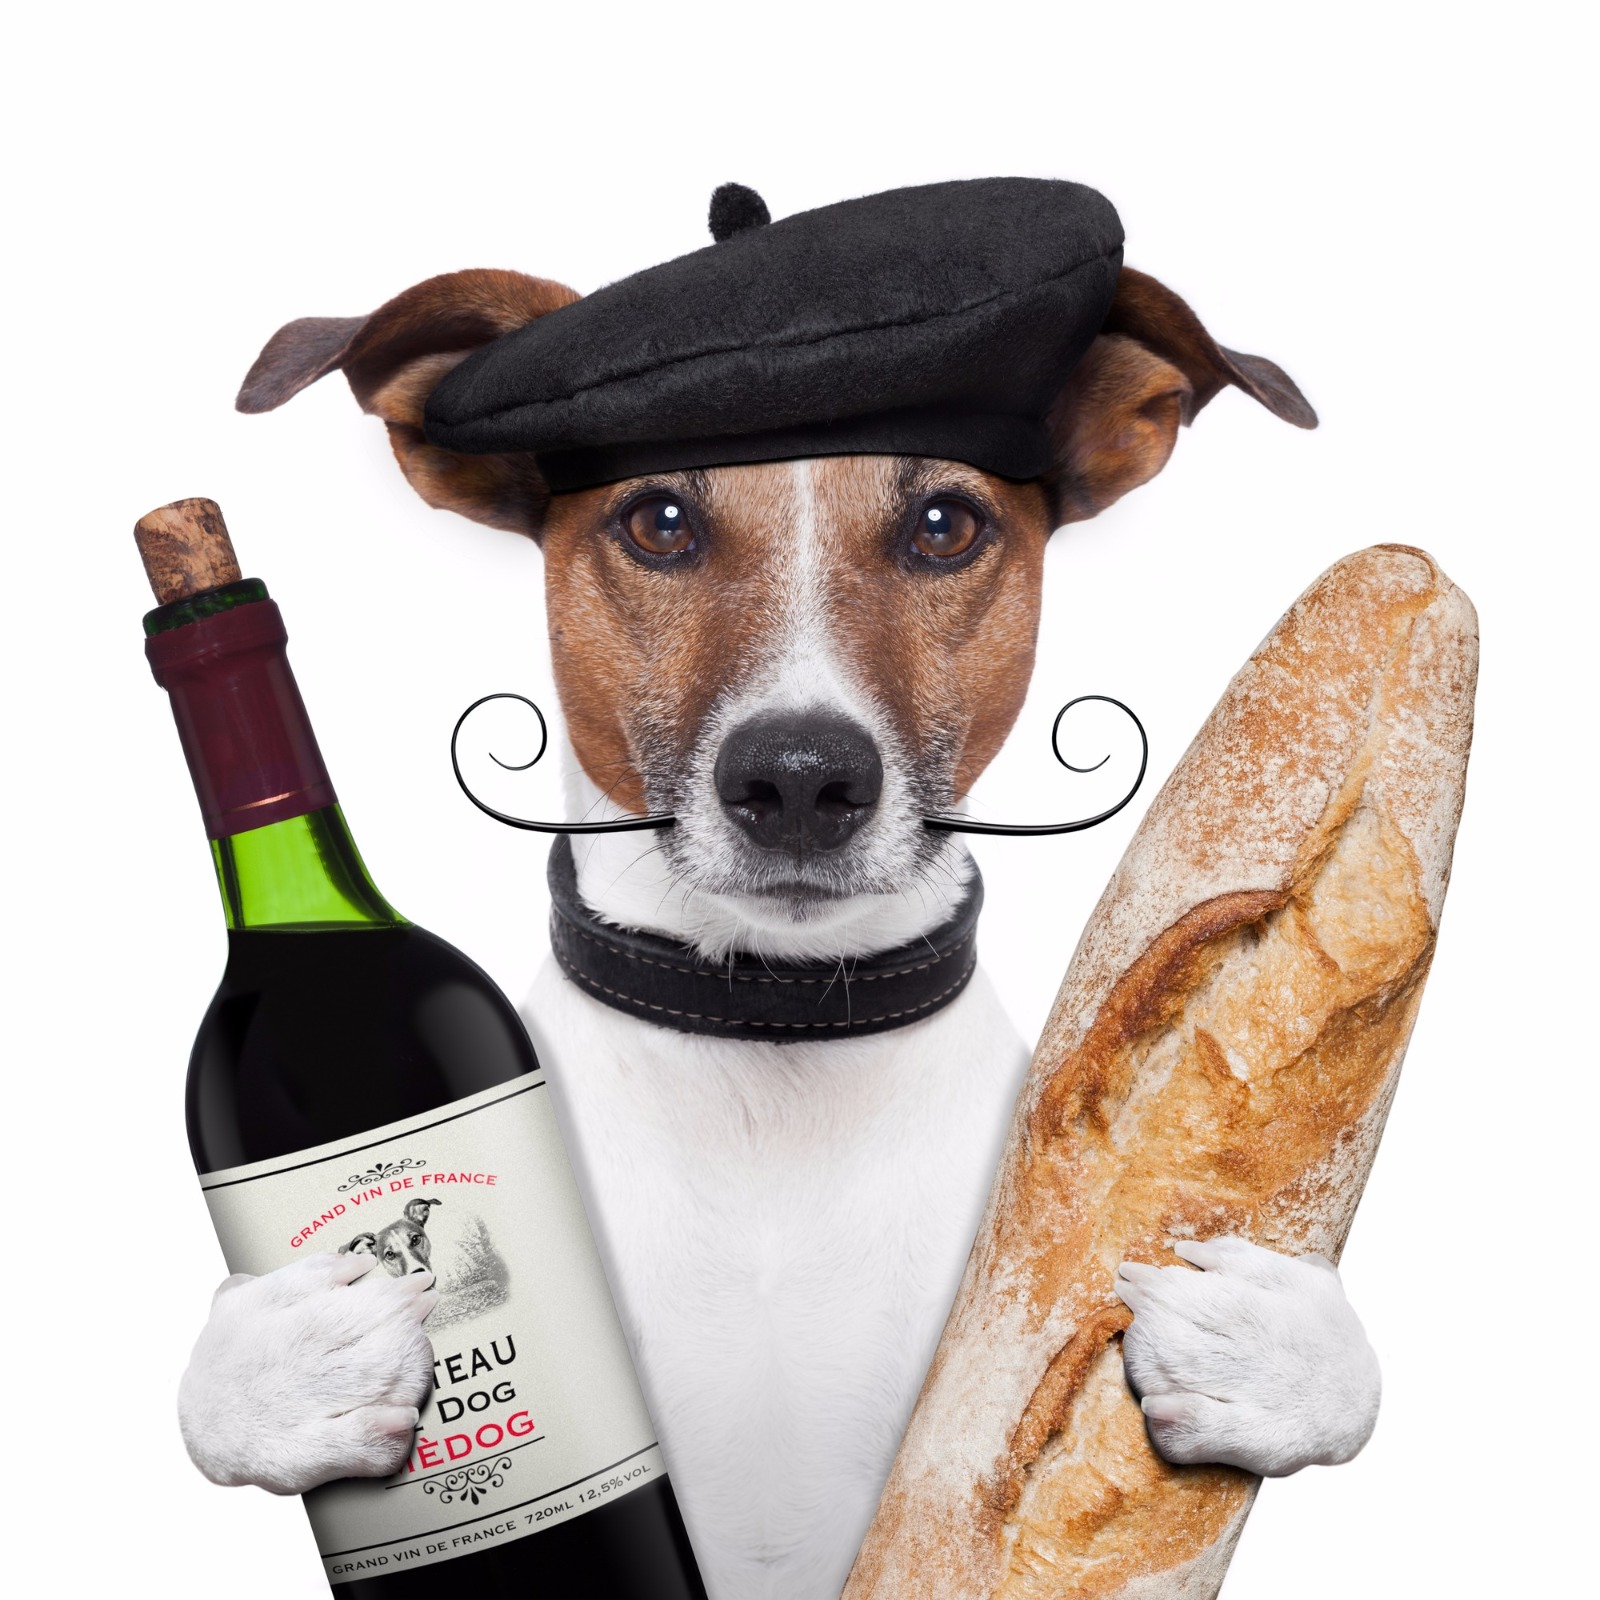 Dog dressed as chef holding French wine and a baguette / Image: Deposit Photos